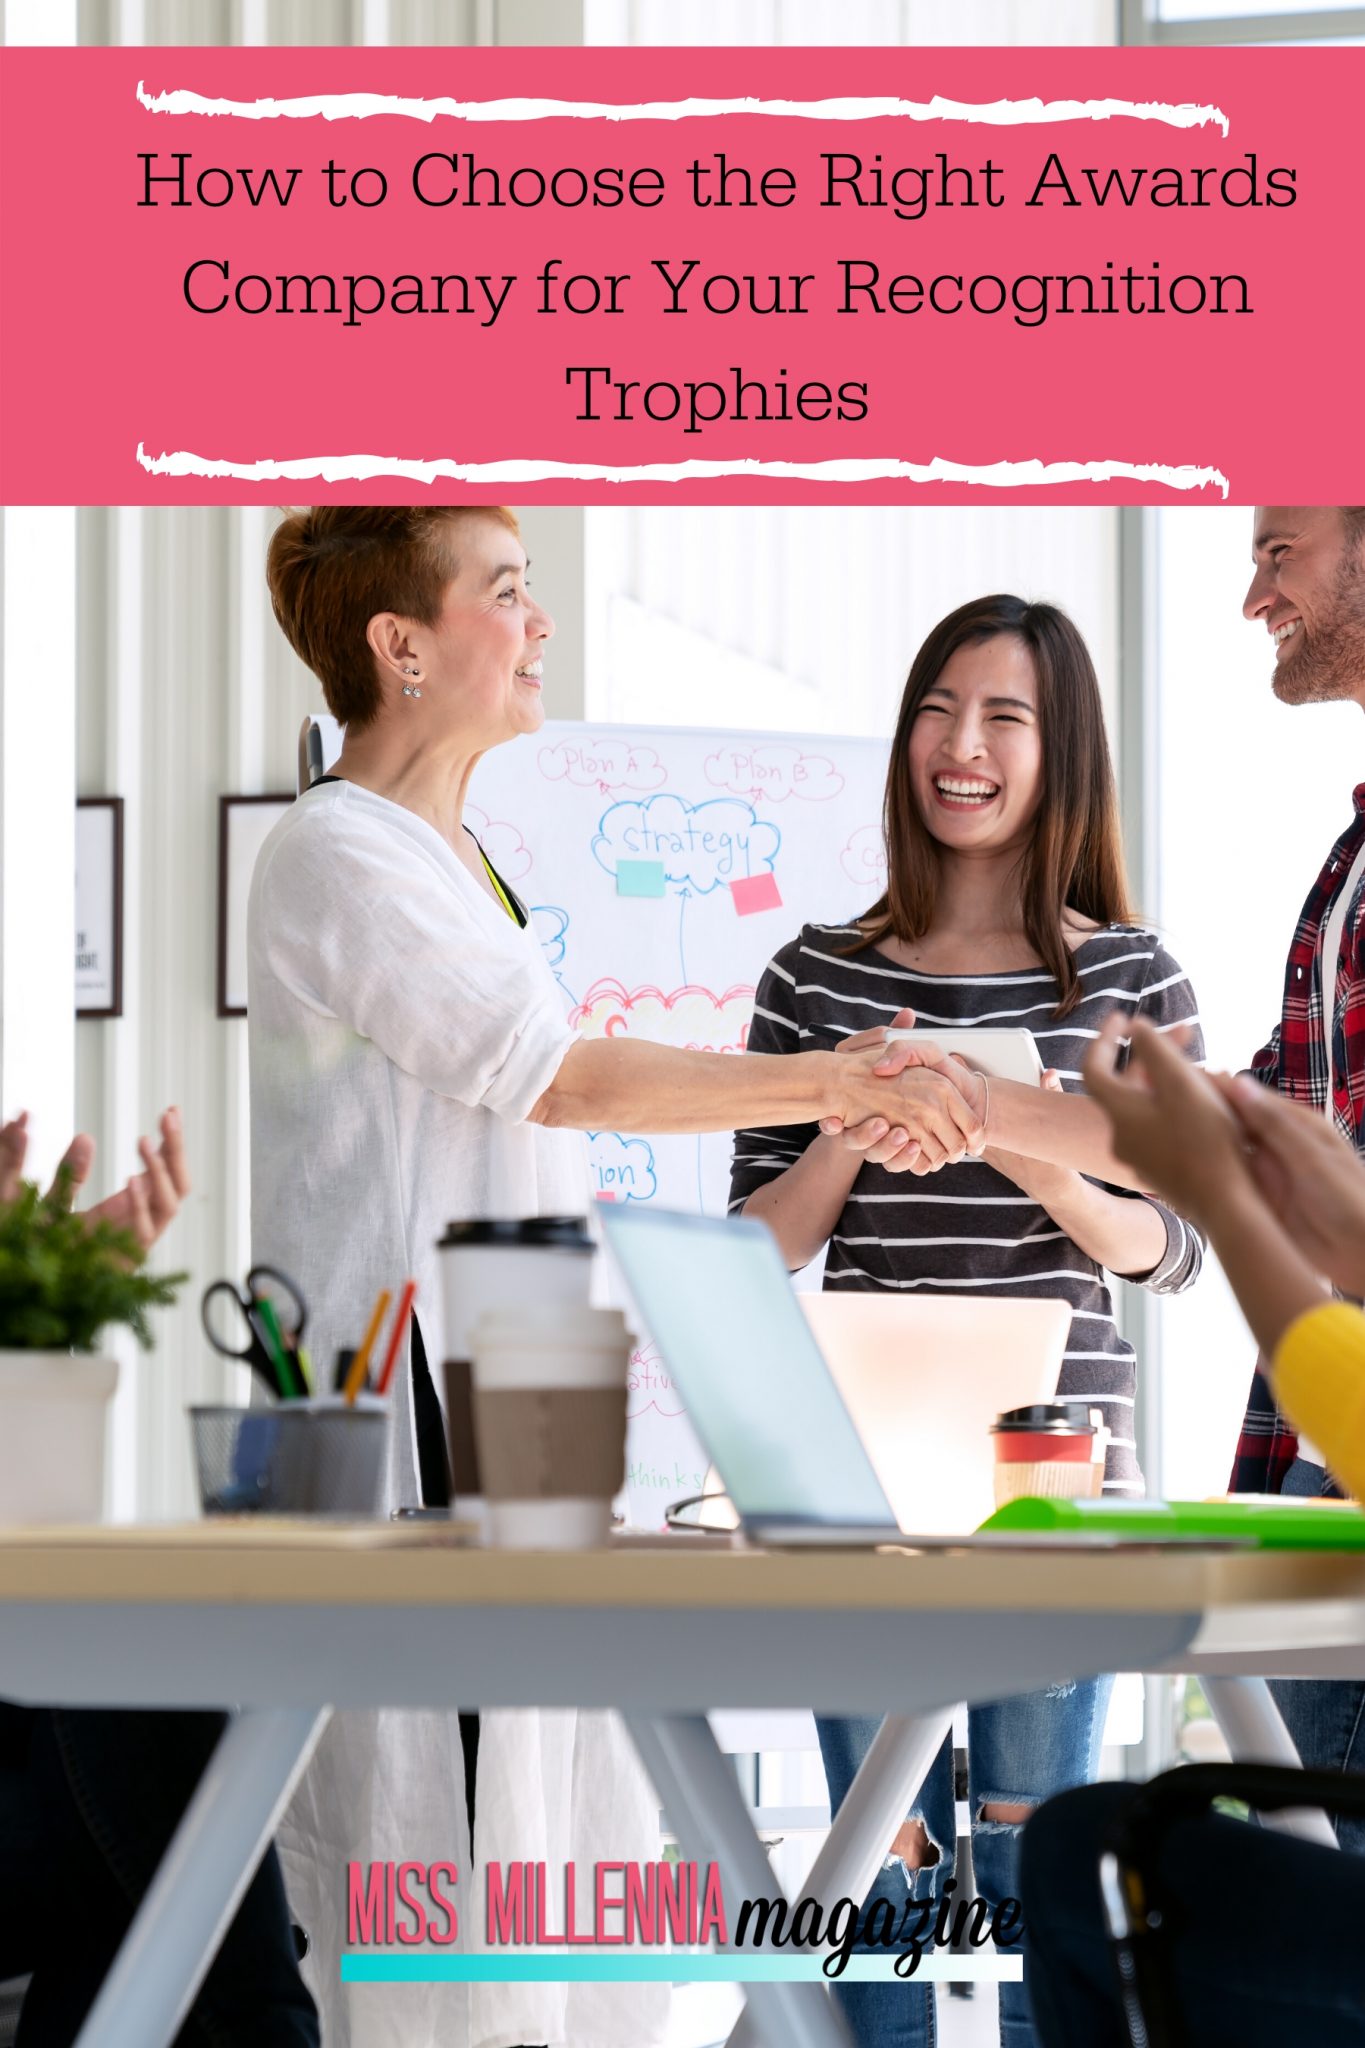 How to Choose the Right Awards Company for Your Recognition Trophies